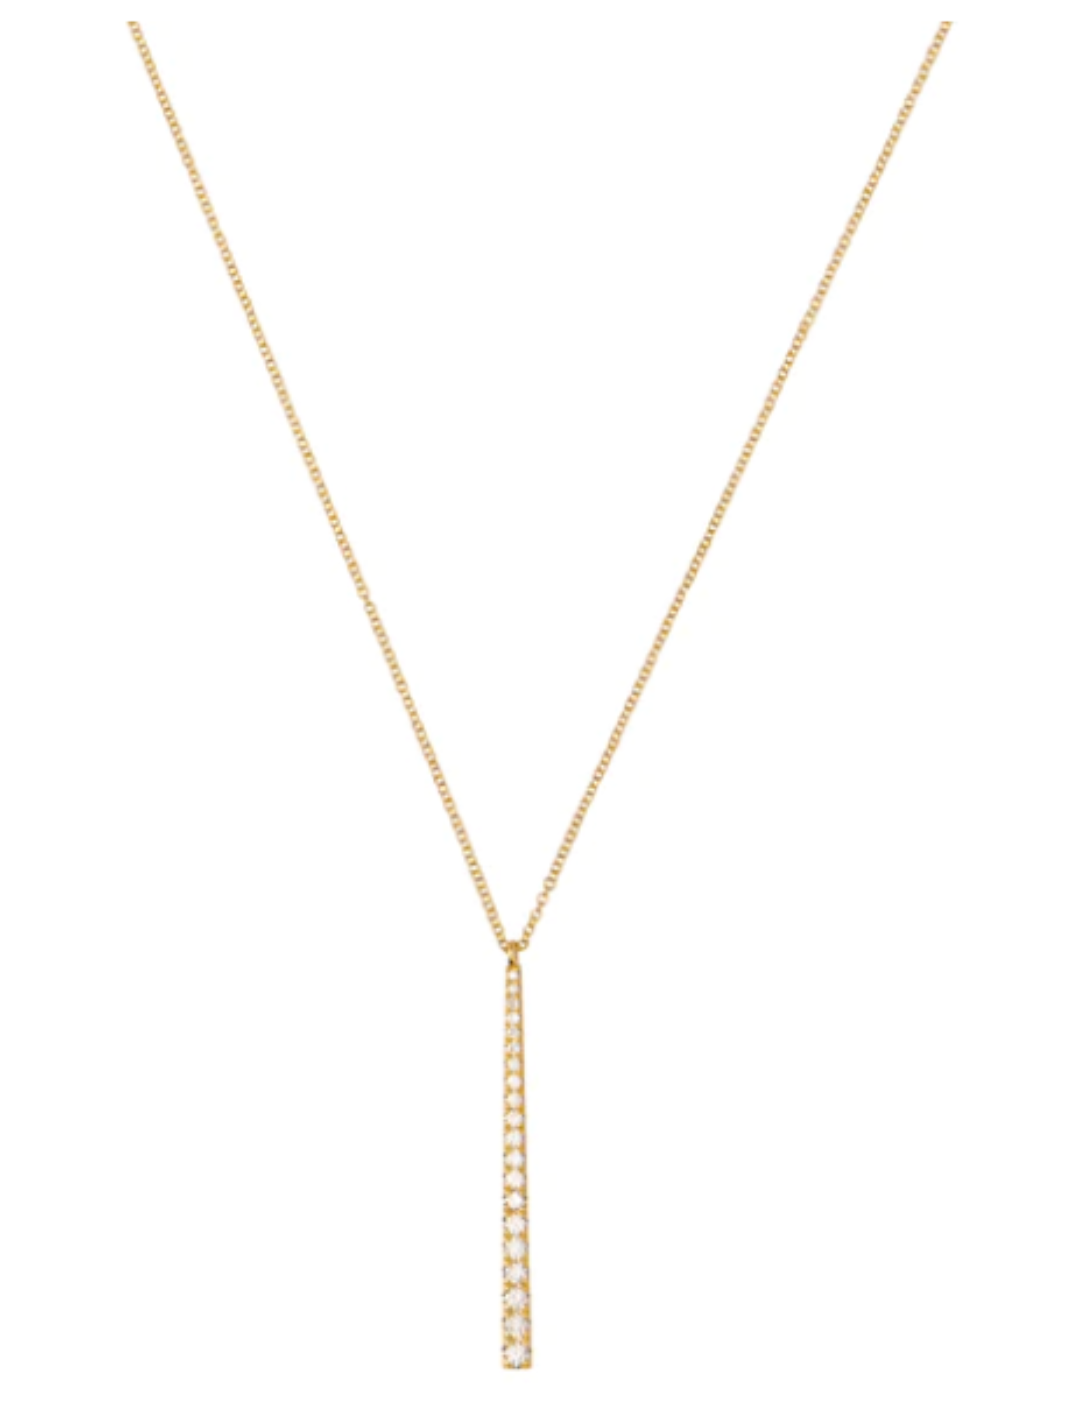 GRADIENT NECKLACE PENDULUM BAR NECKLACE IN GOLD